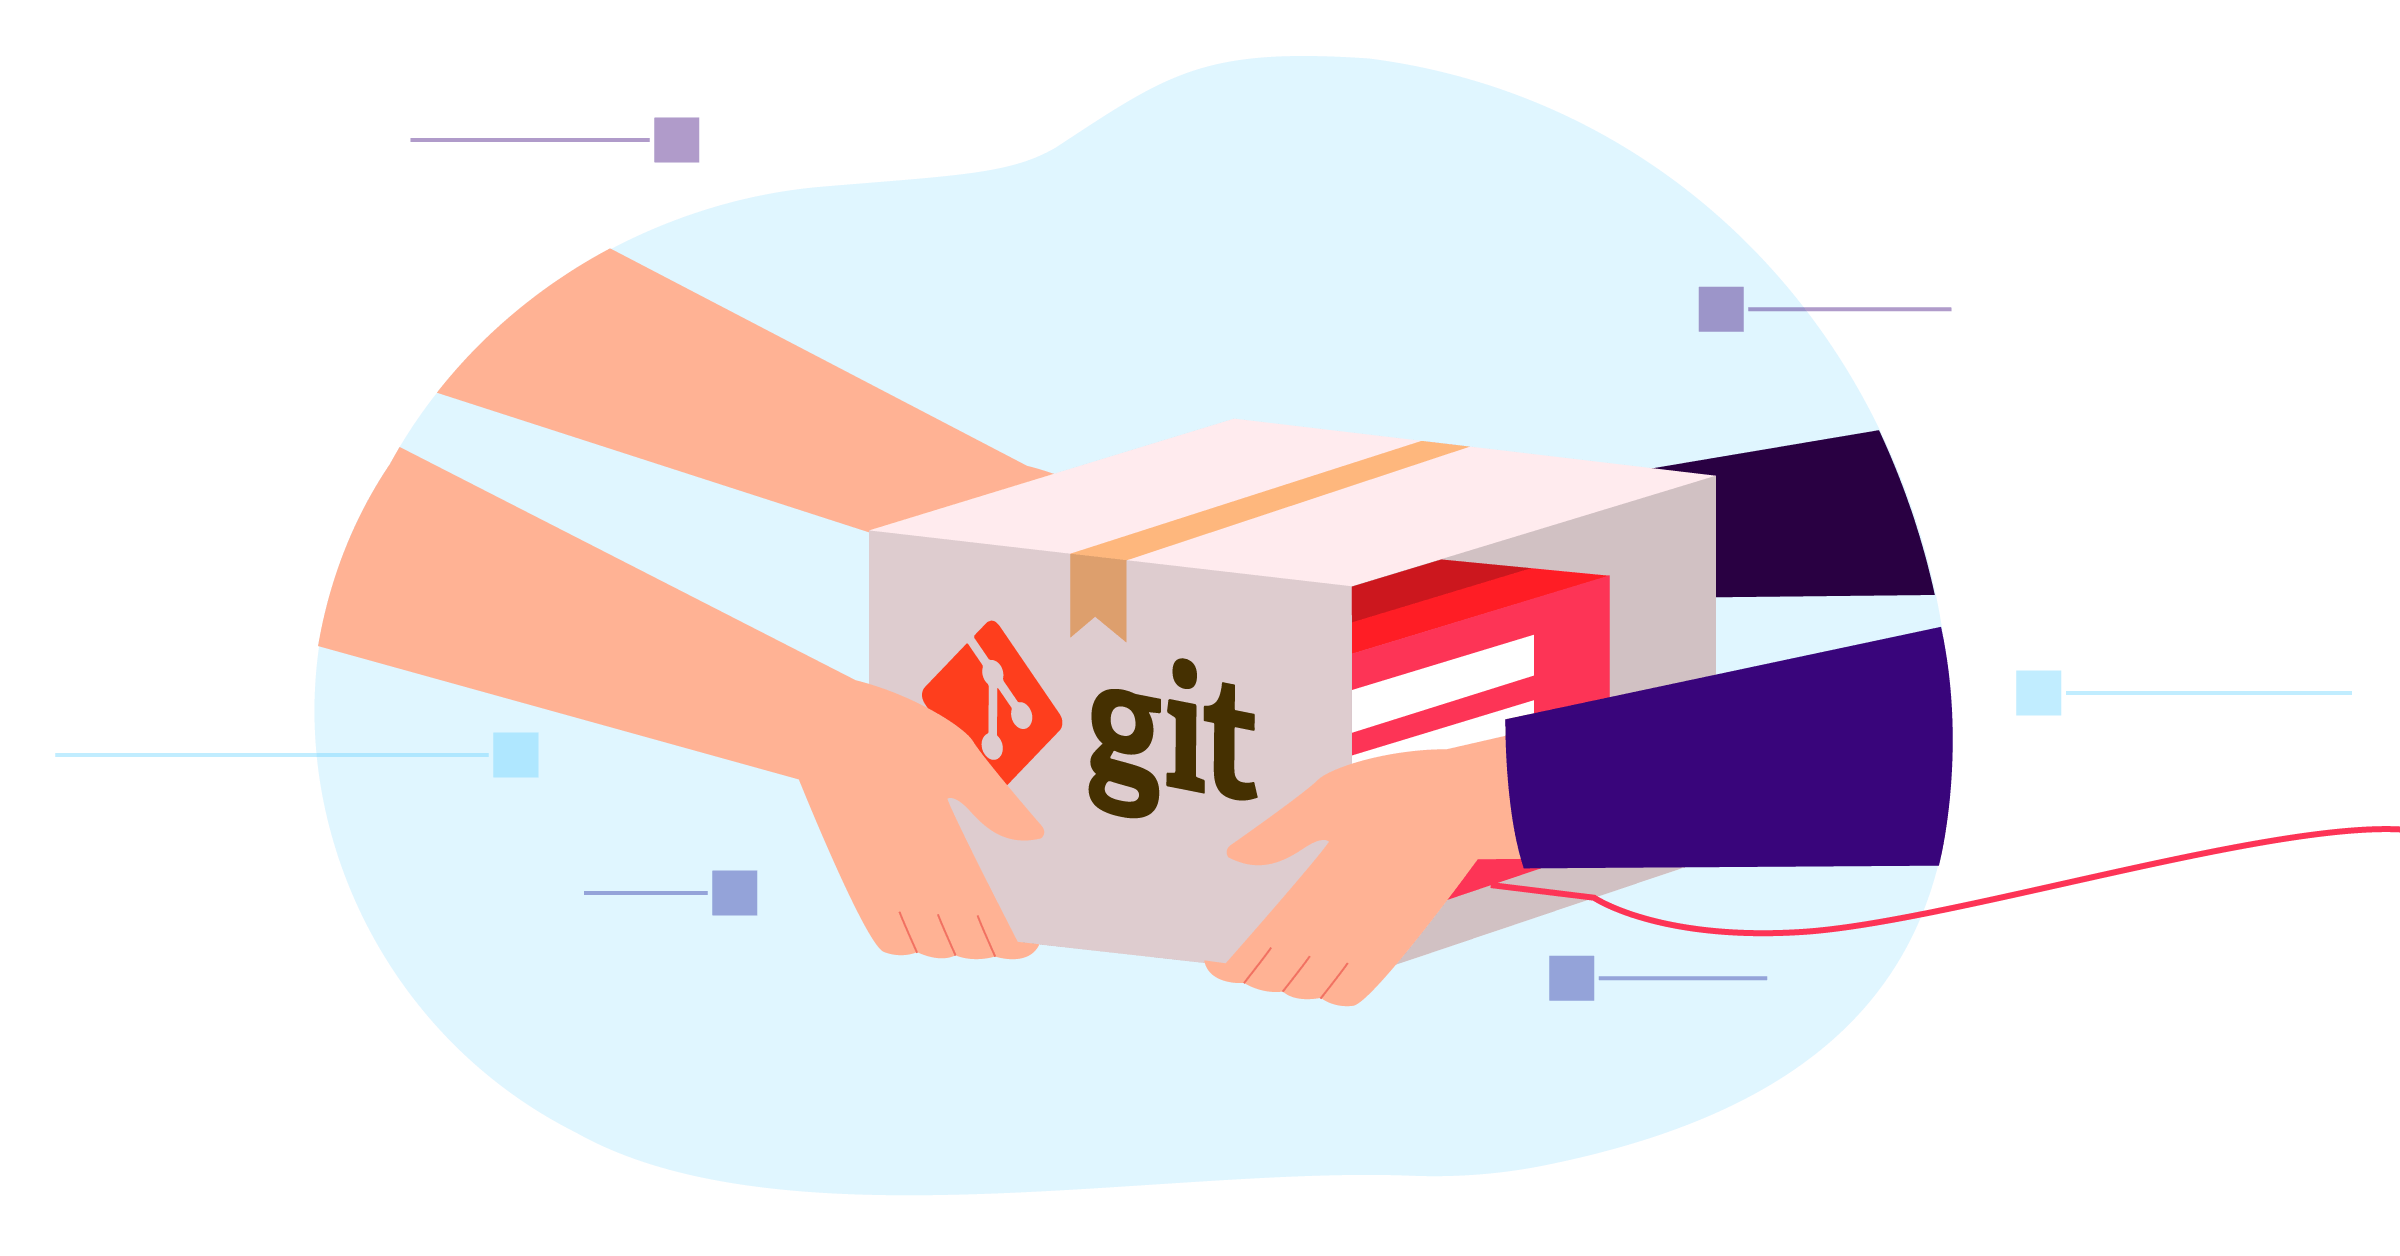 With this series, we present the results of our research on the security of popular developer tools with the goal of making this ecosystem safer: today’s article revisits Git integrations.